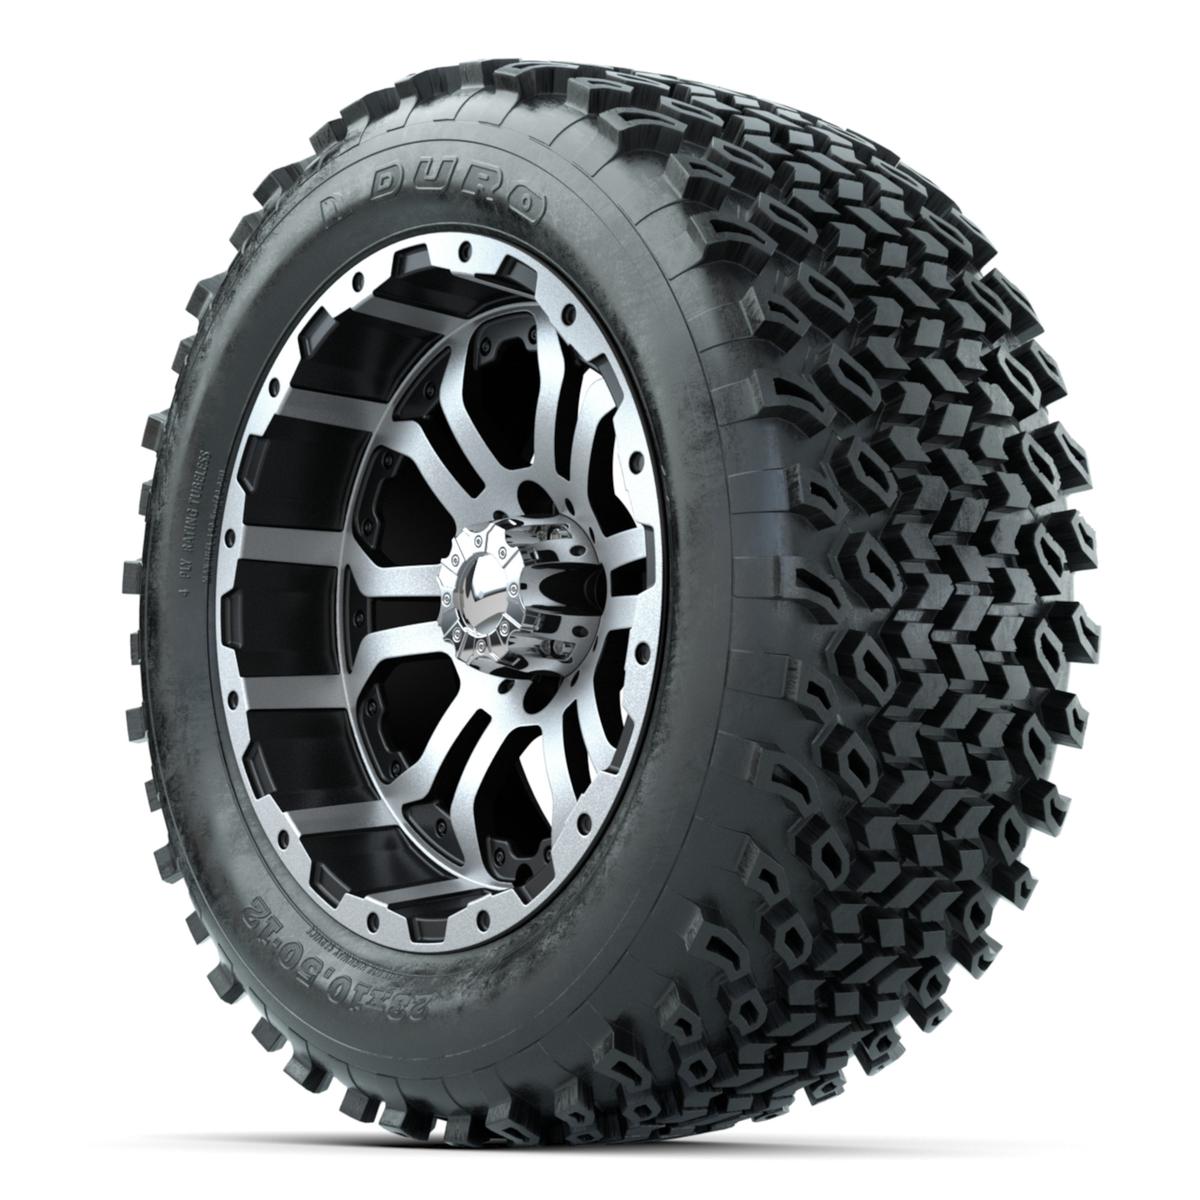 Set of (4) 14 in GTW Omega Wheels with 23x10-14 Duro Desert All-Terrain Tires